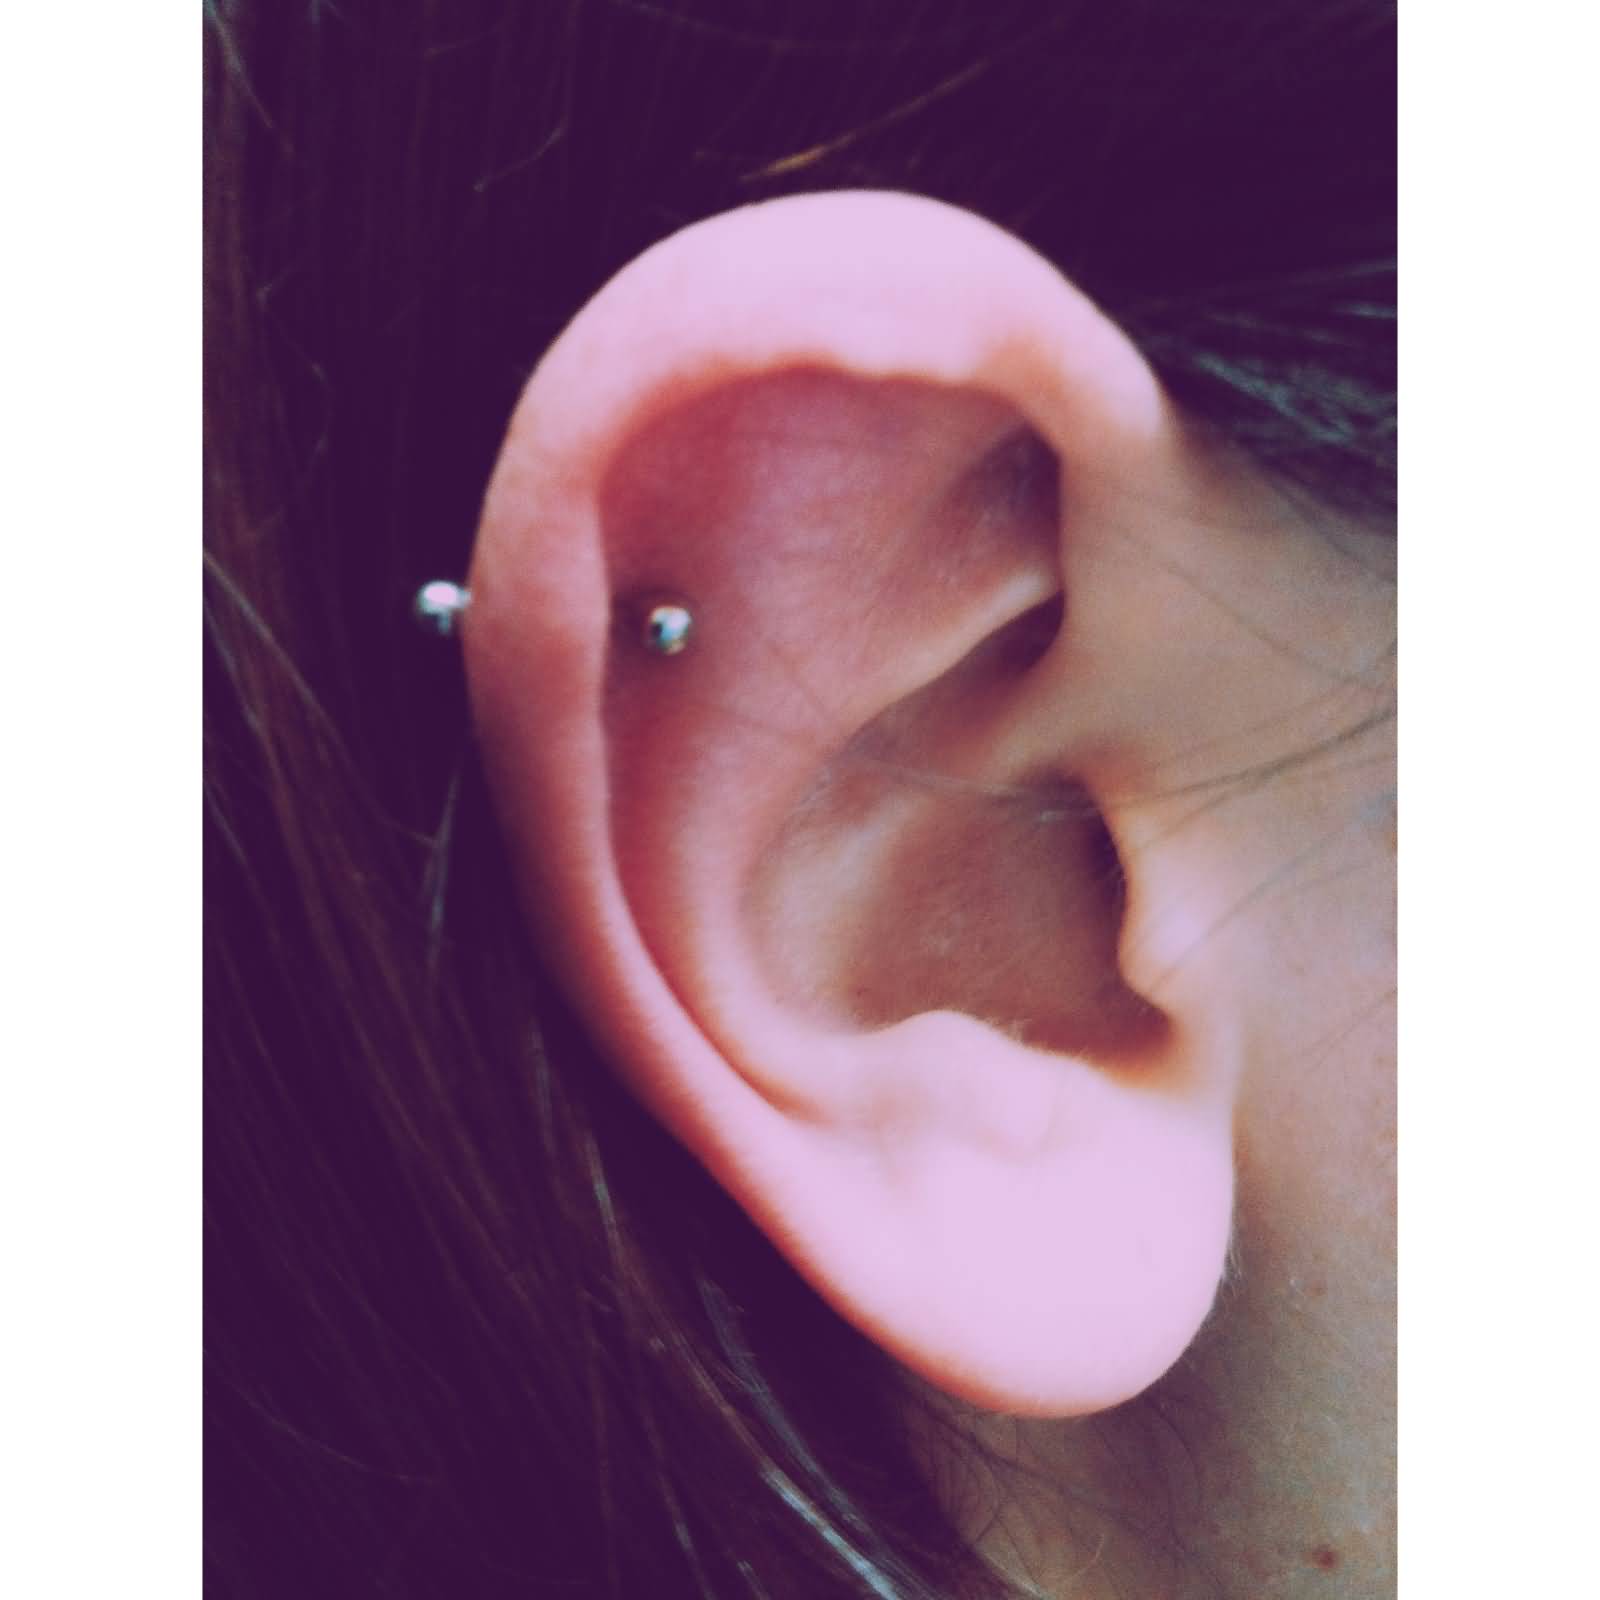 Helix Or Rim Piercing With Silver Barbell